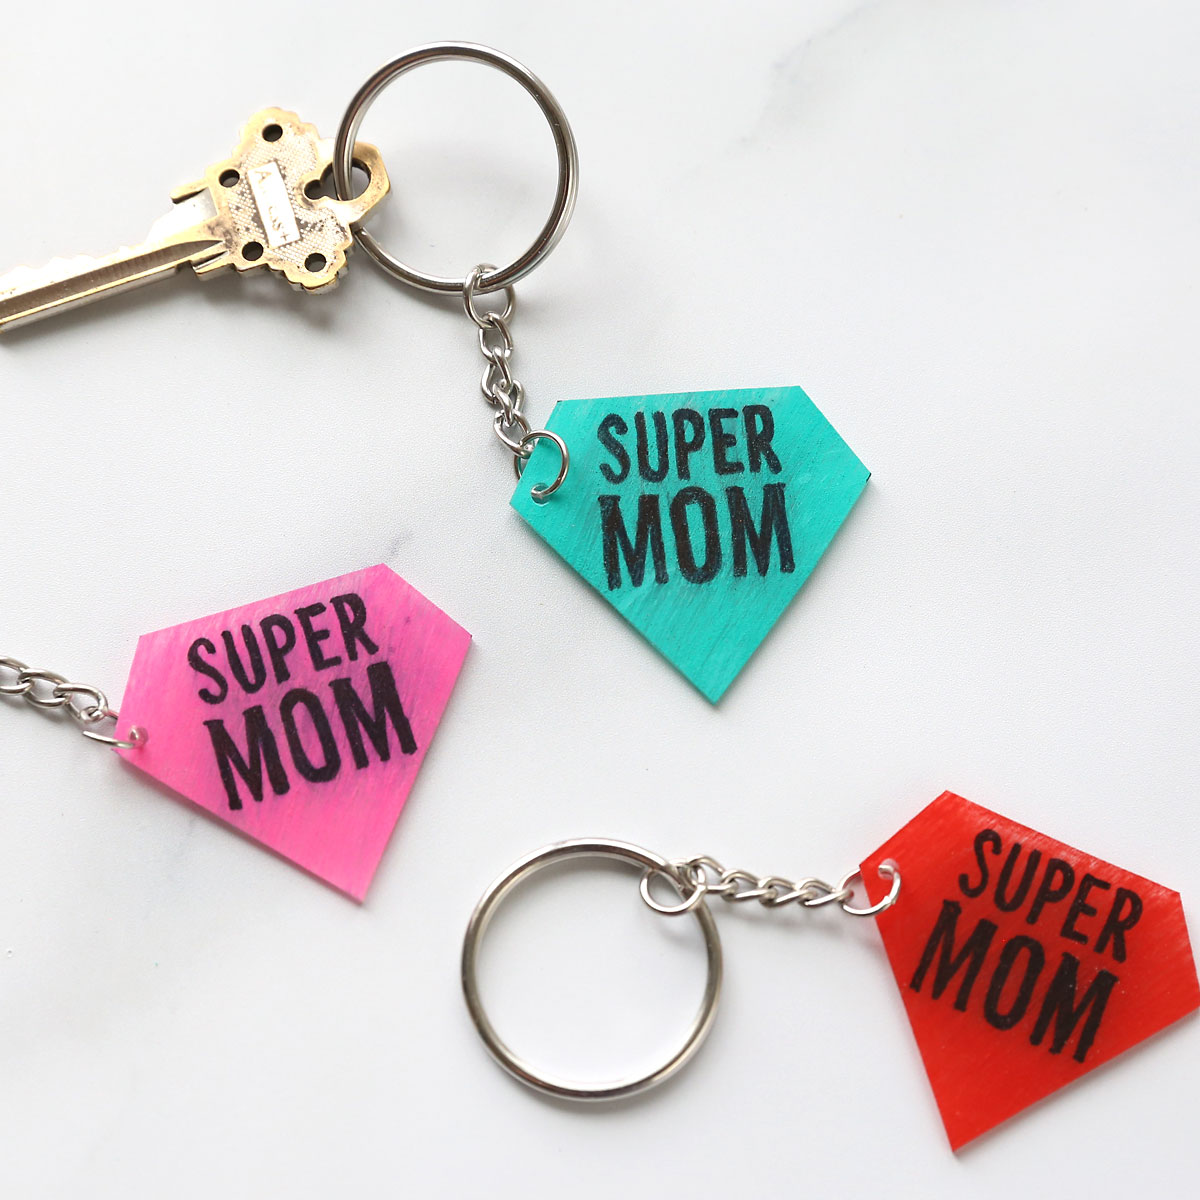 Shrinky Dink Key Chain - Juggling Act Mama